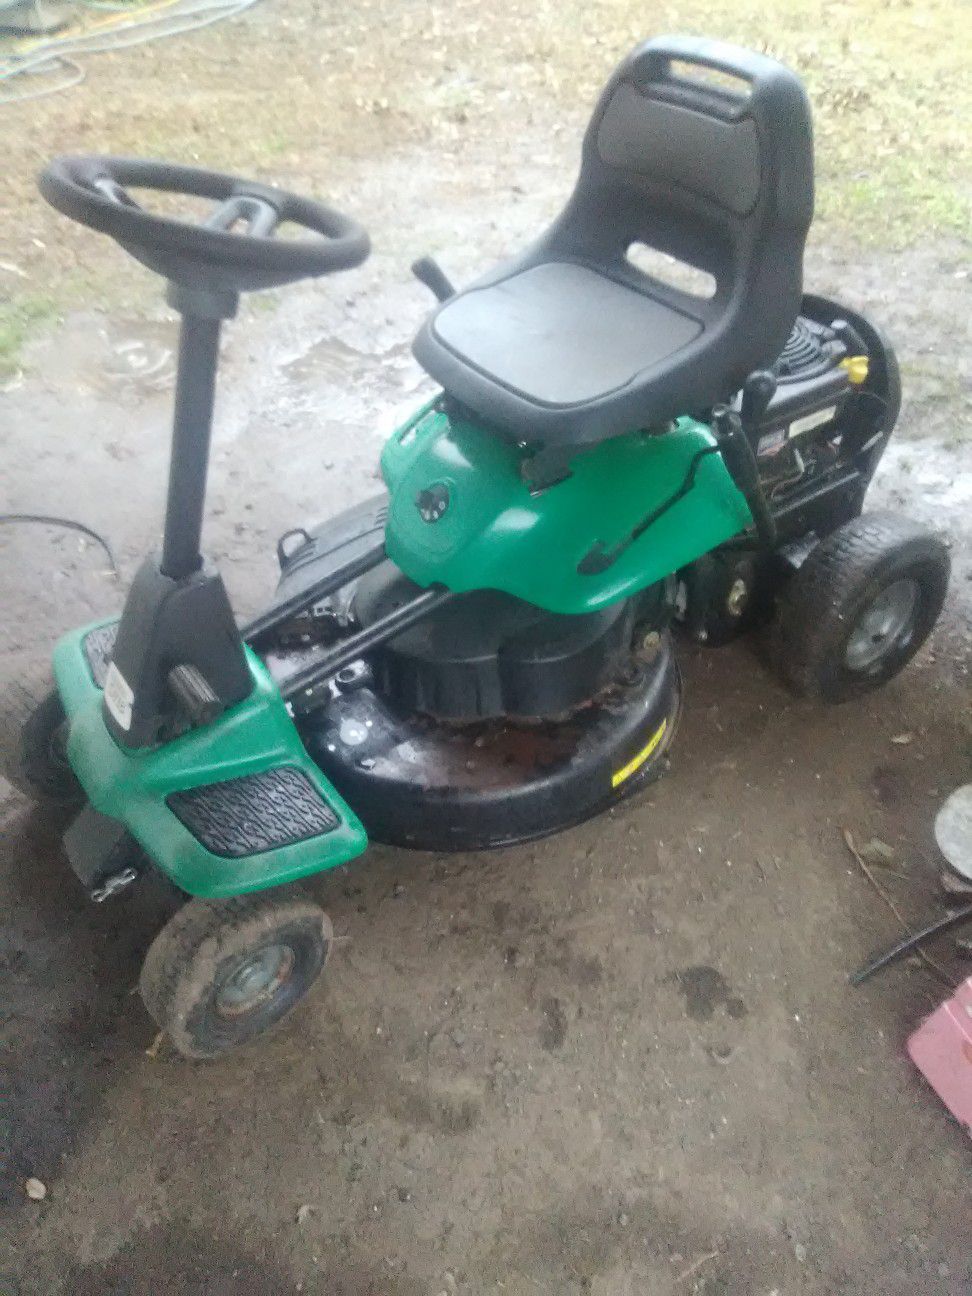 Weed eater one riding lawn mower